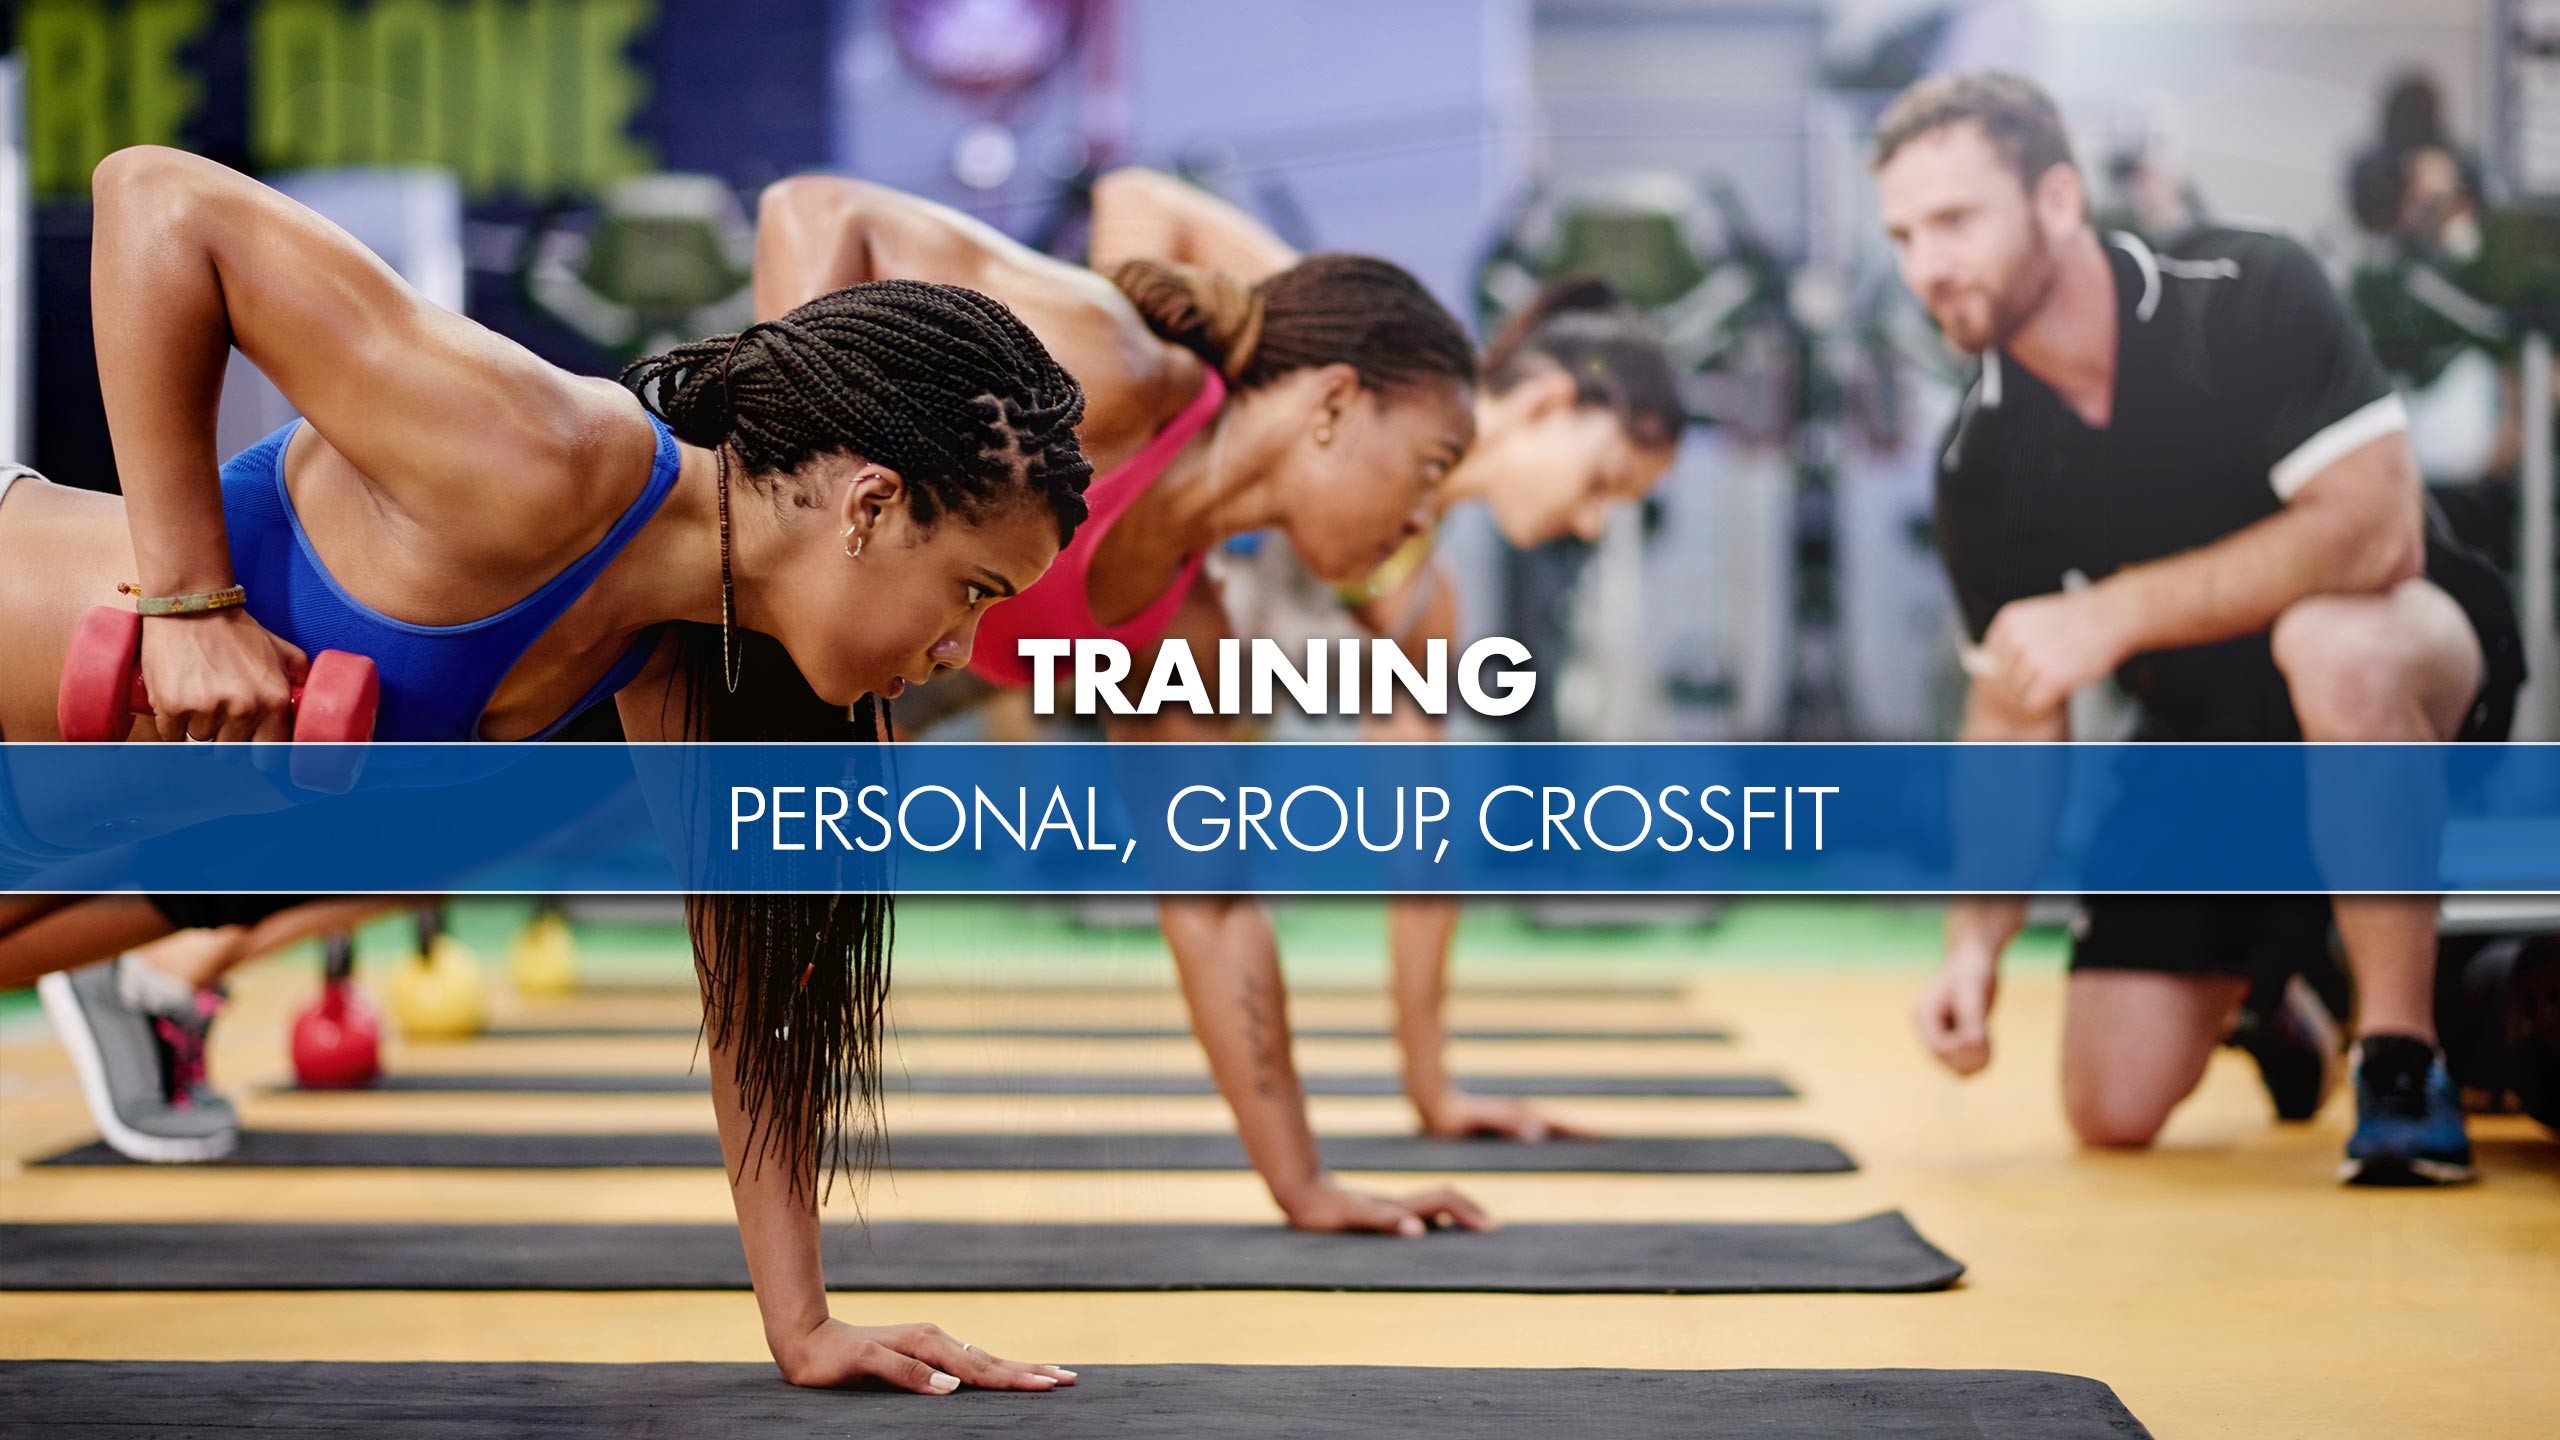 Training - Personal, Group, Crossfit